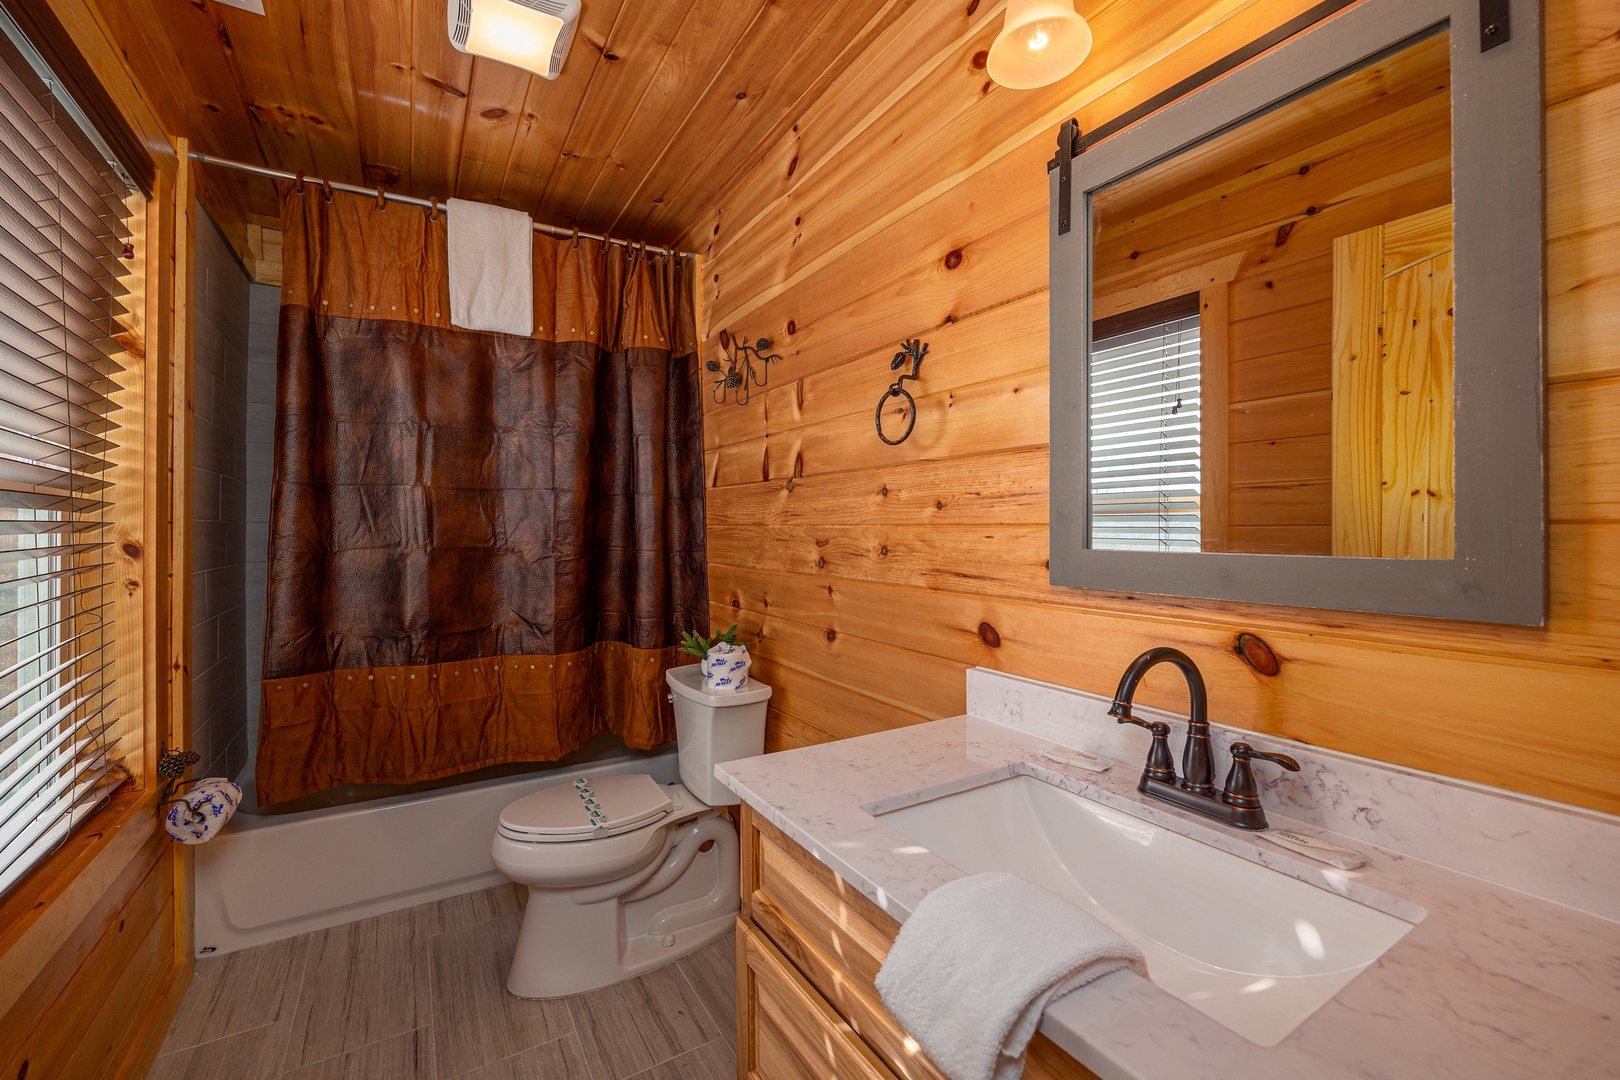 Third bathroom at Mountain Pool & Paradise, a 3 bedroom cabin rental located in Pigeon Forge